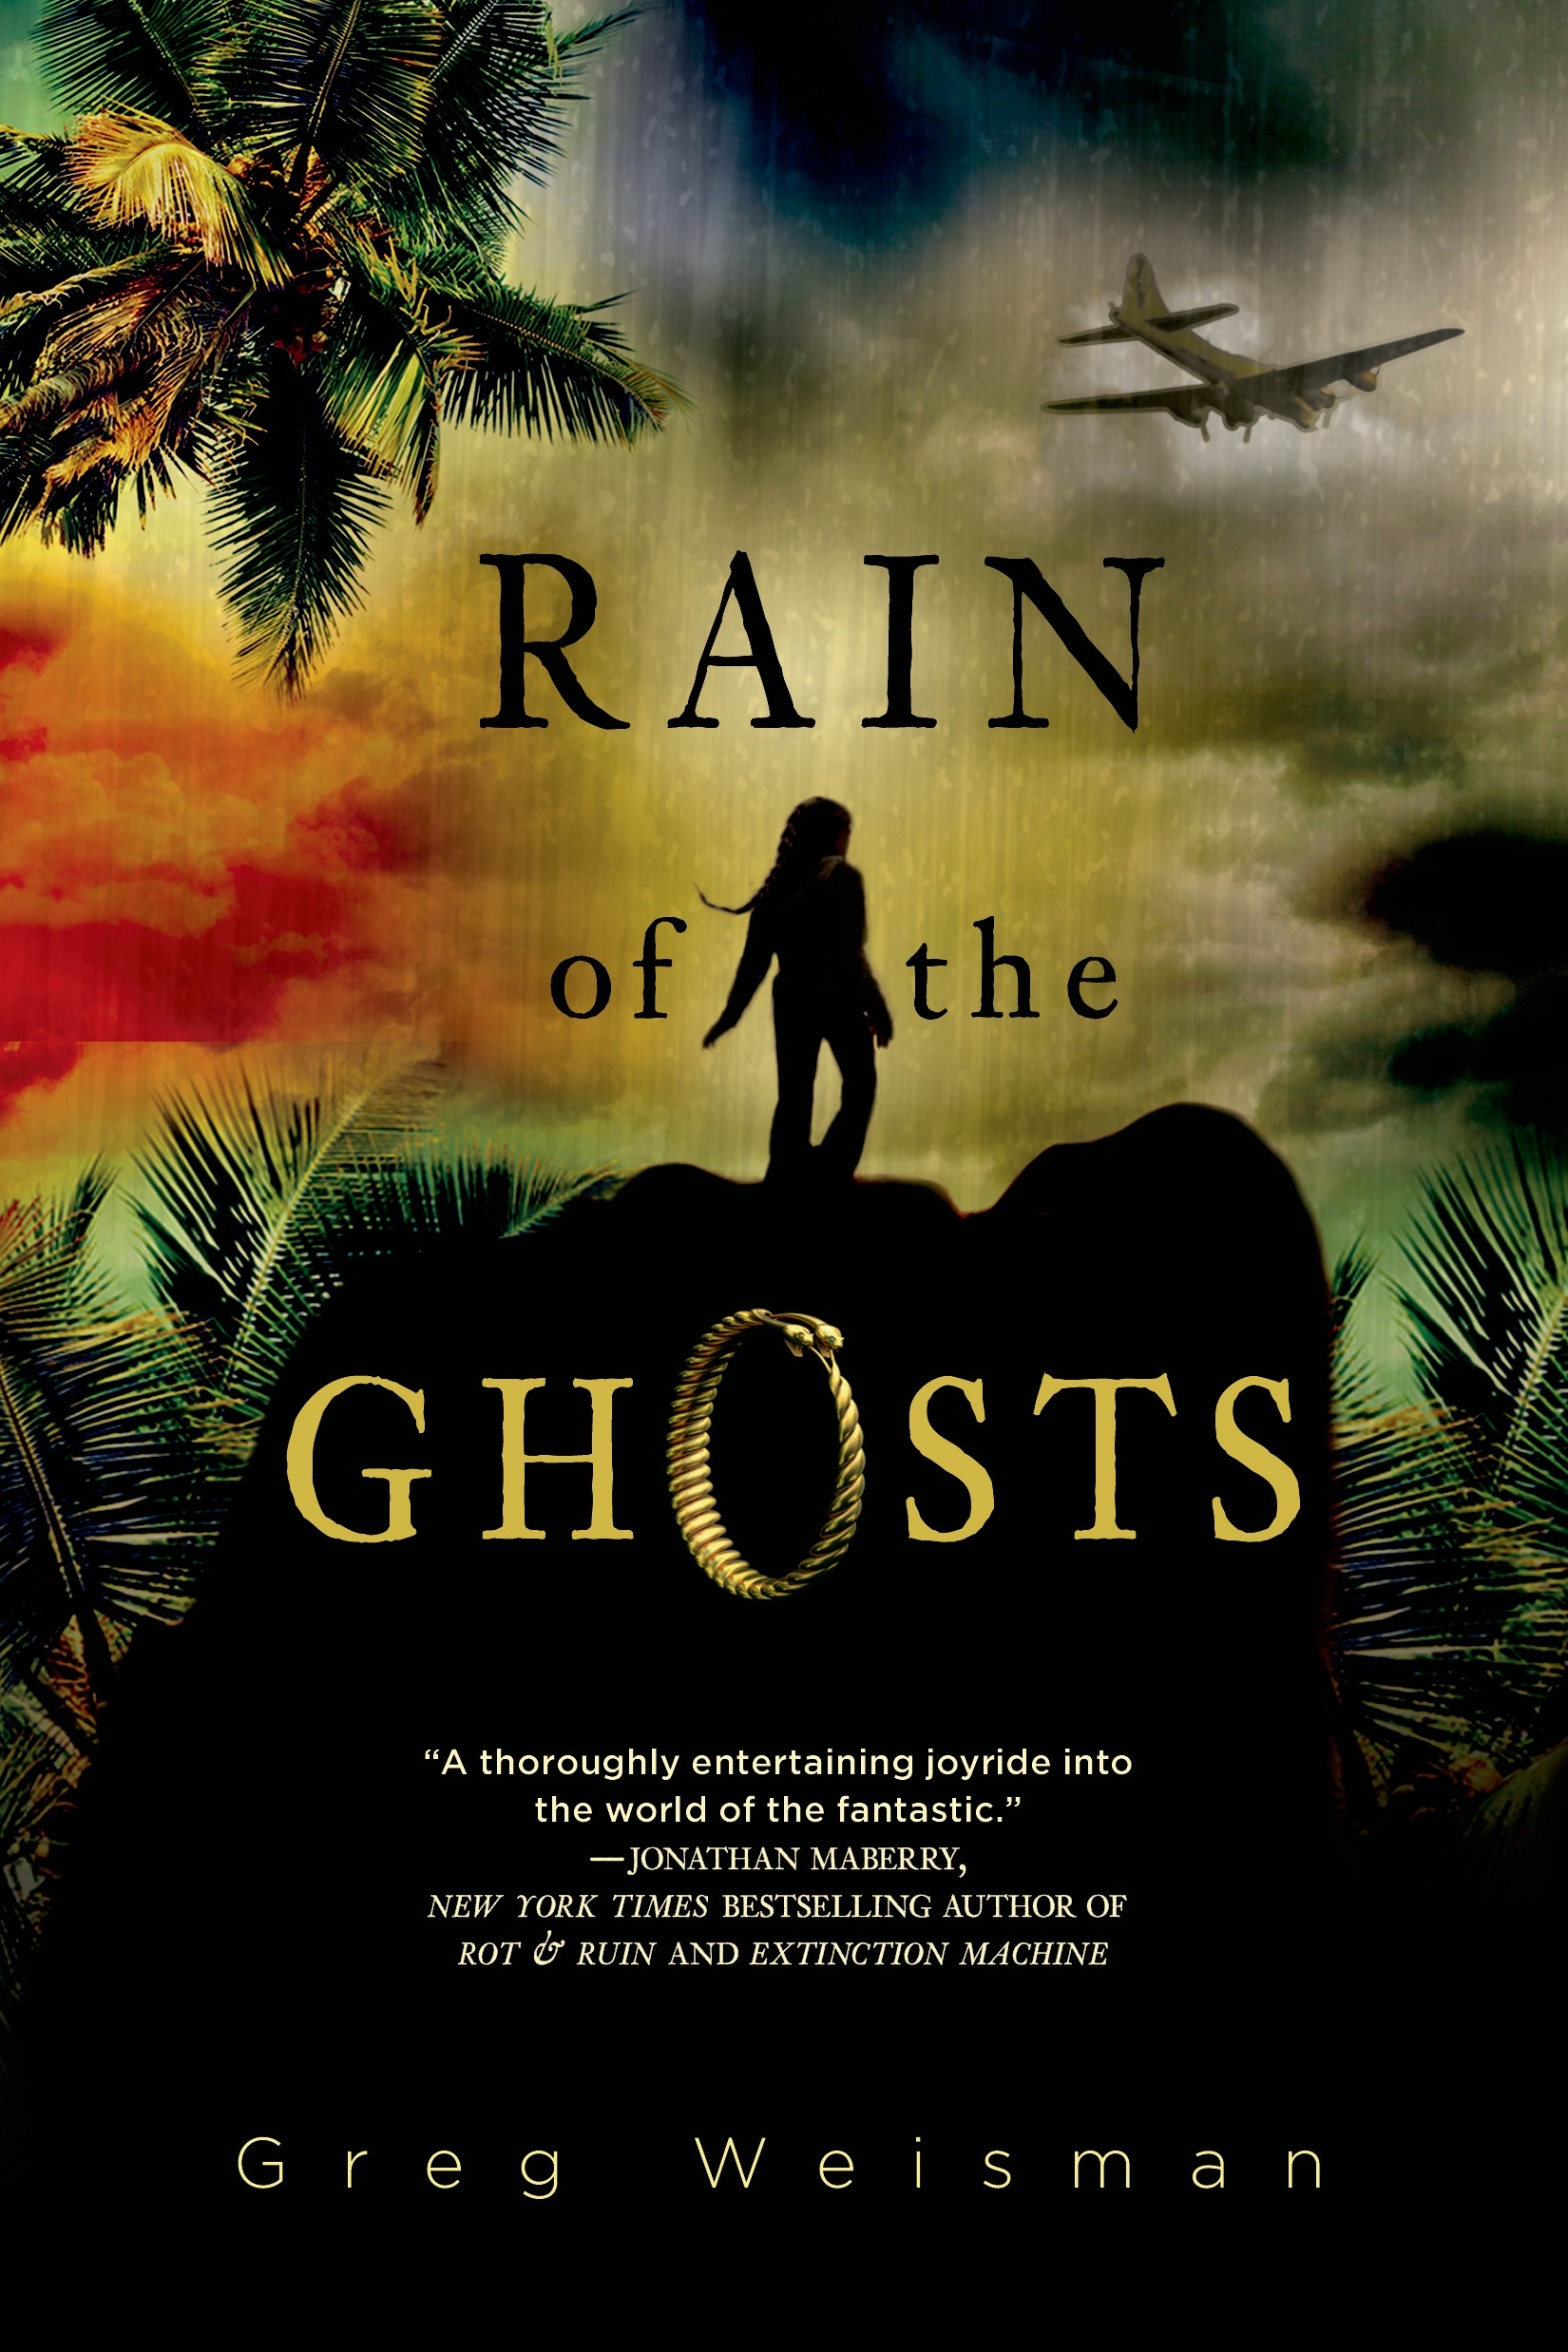 Rain of the Ghosts - image 1 of 2